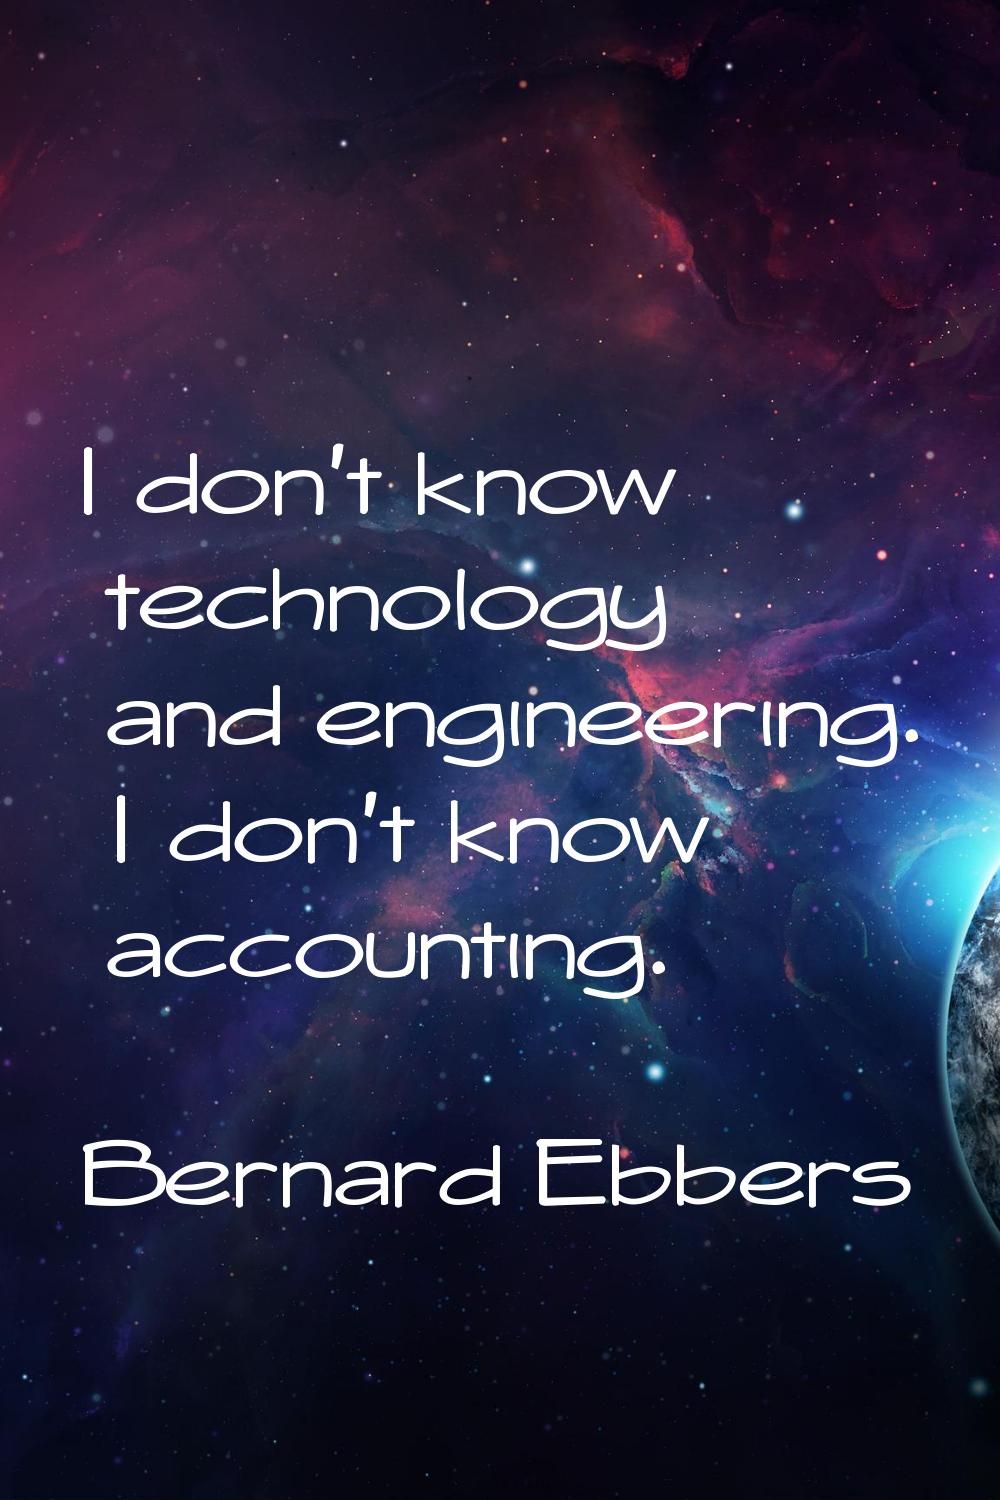 I don't know technology and engineering. I don't know accounting.